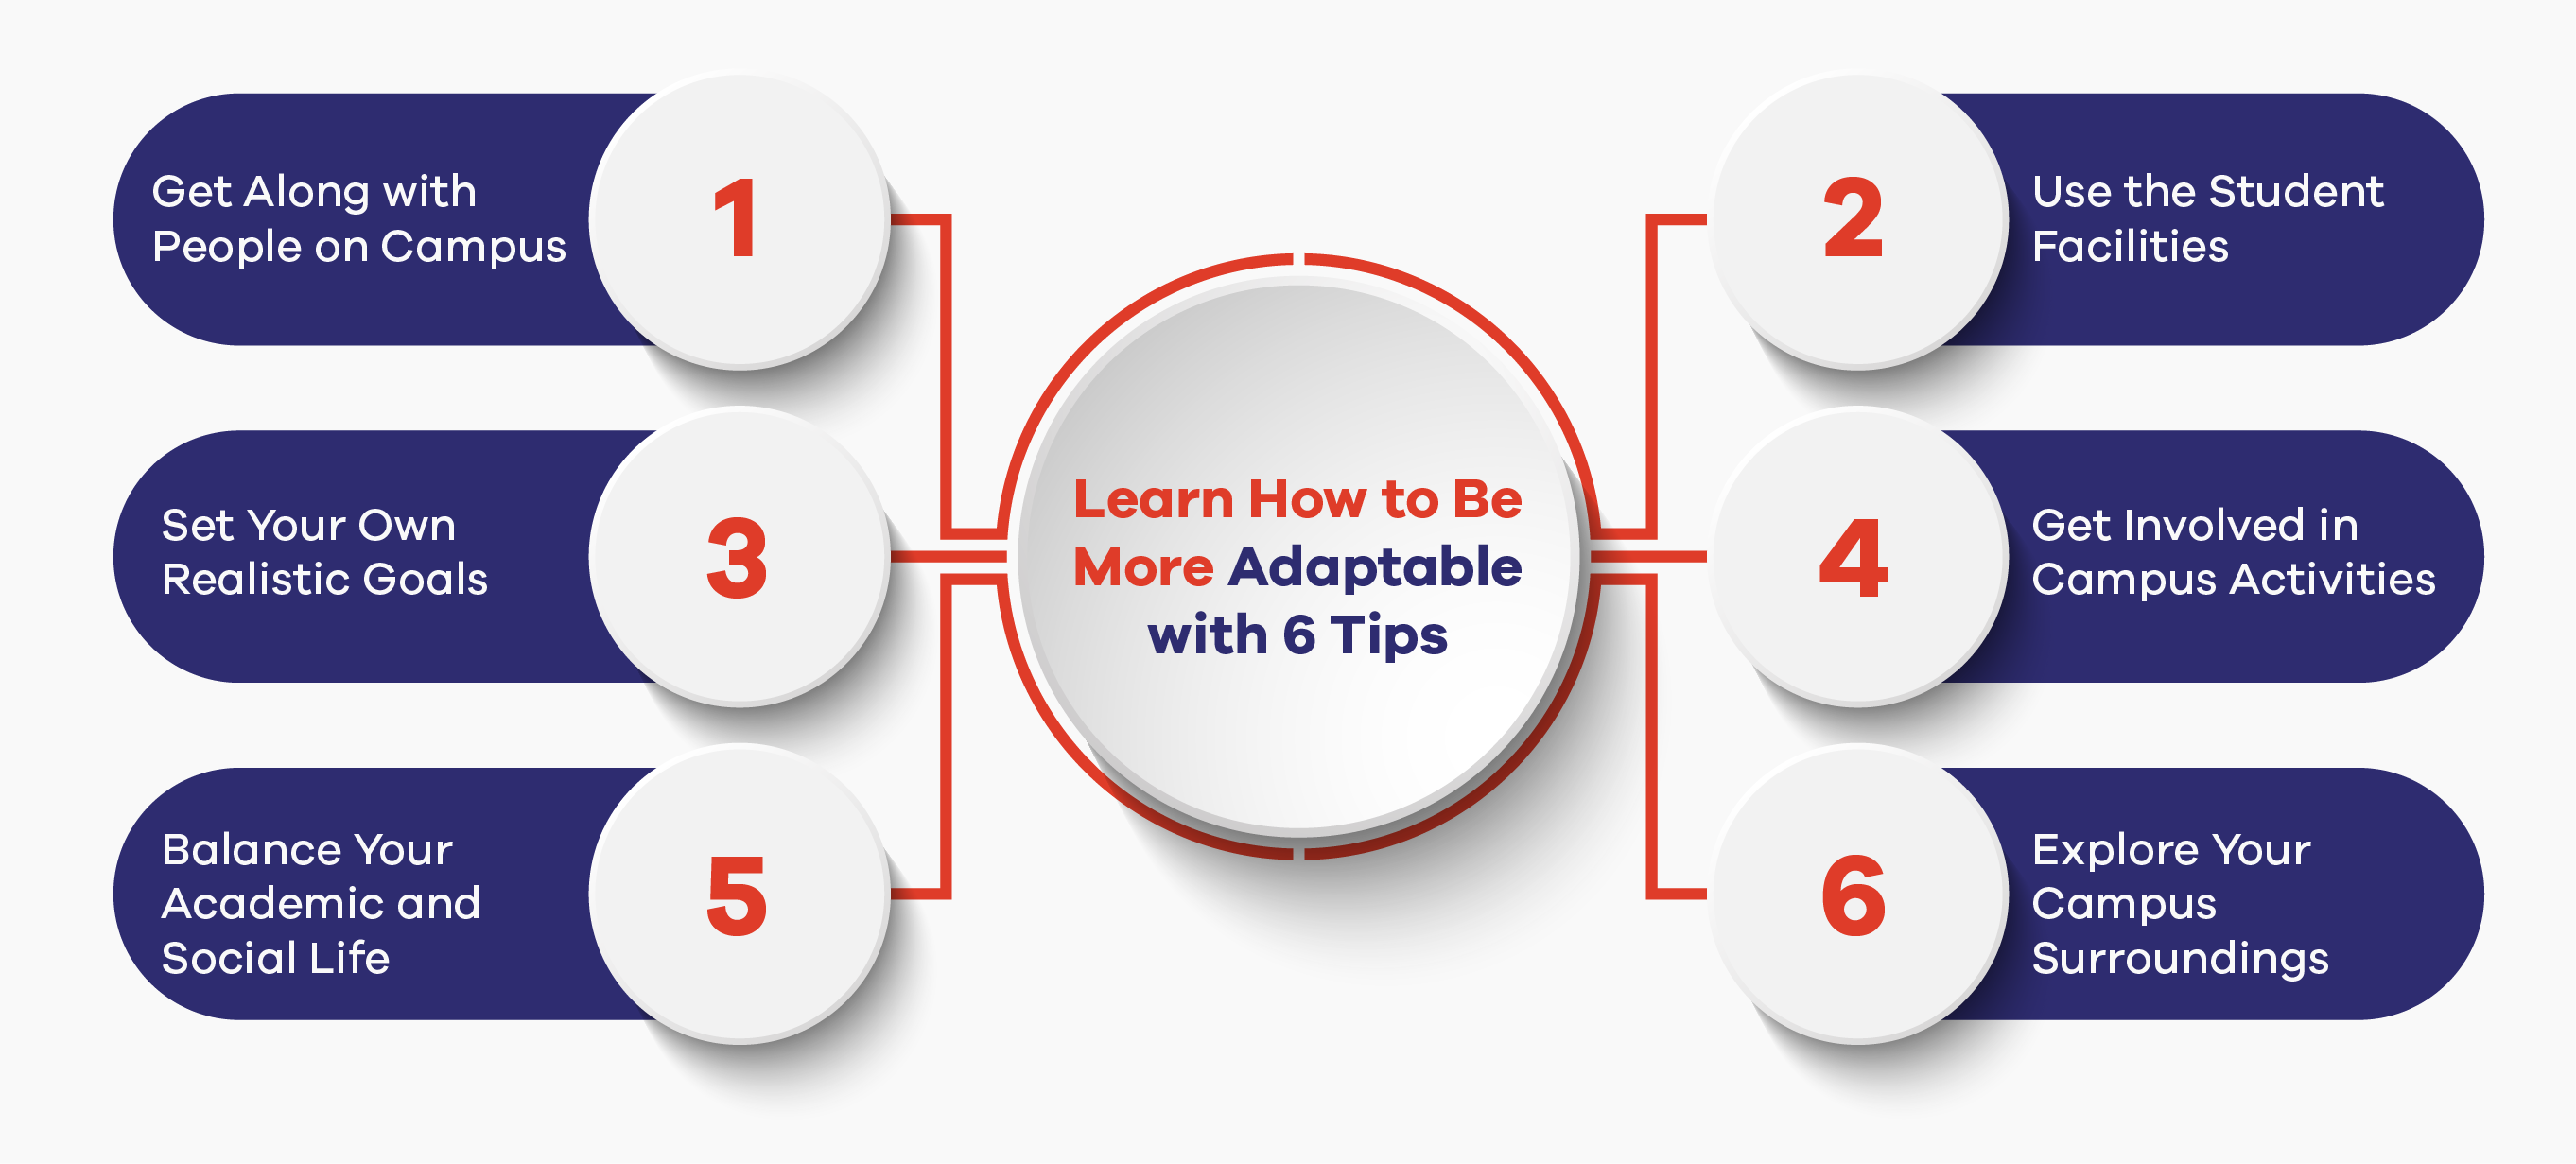 Learn How to Be More Adaptable with 6 Tips 